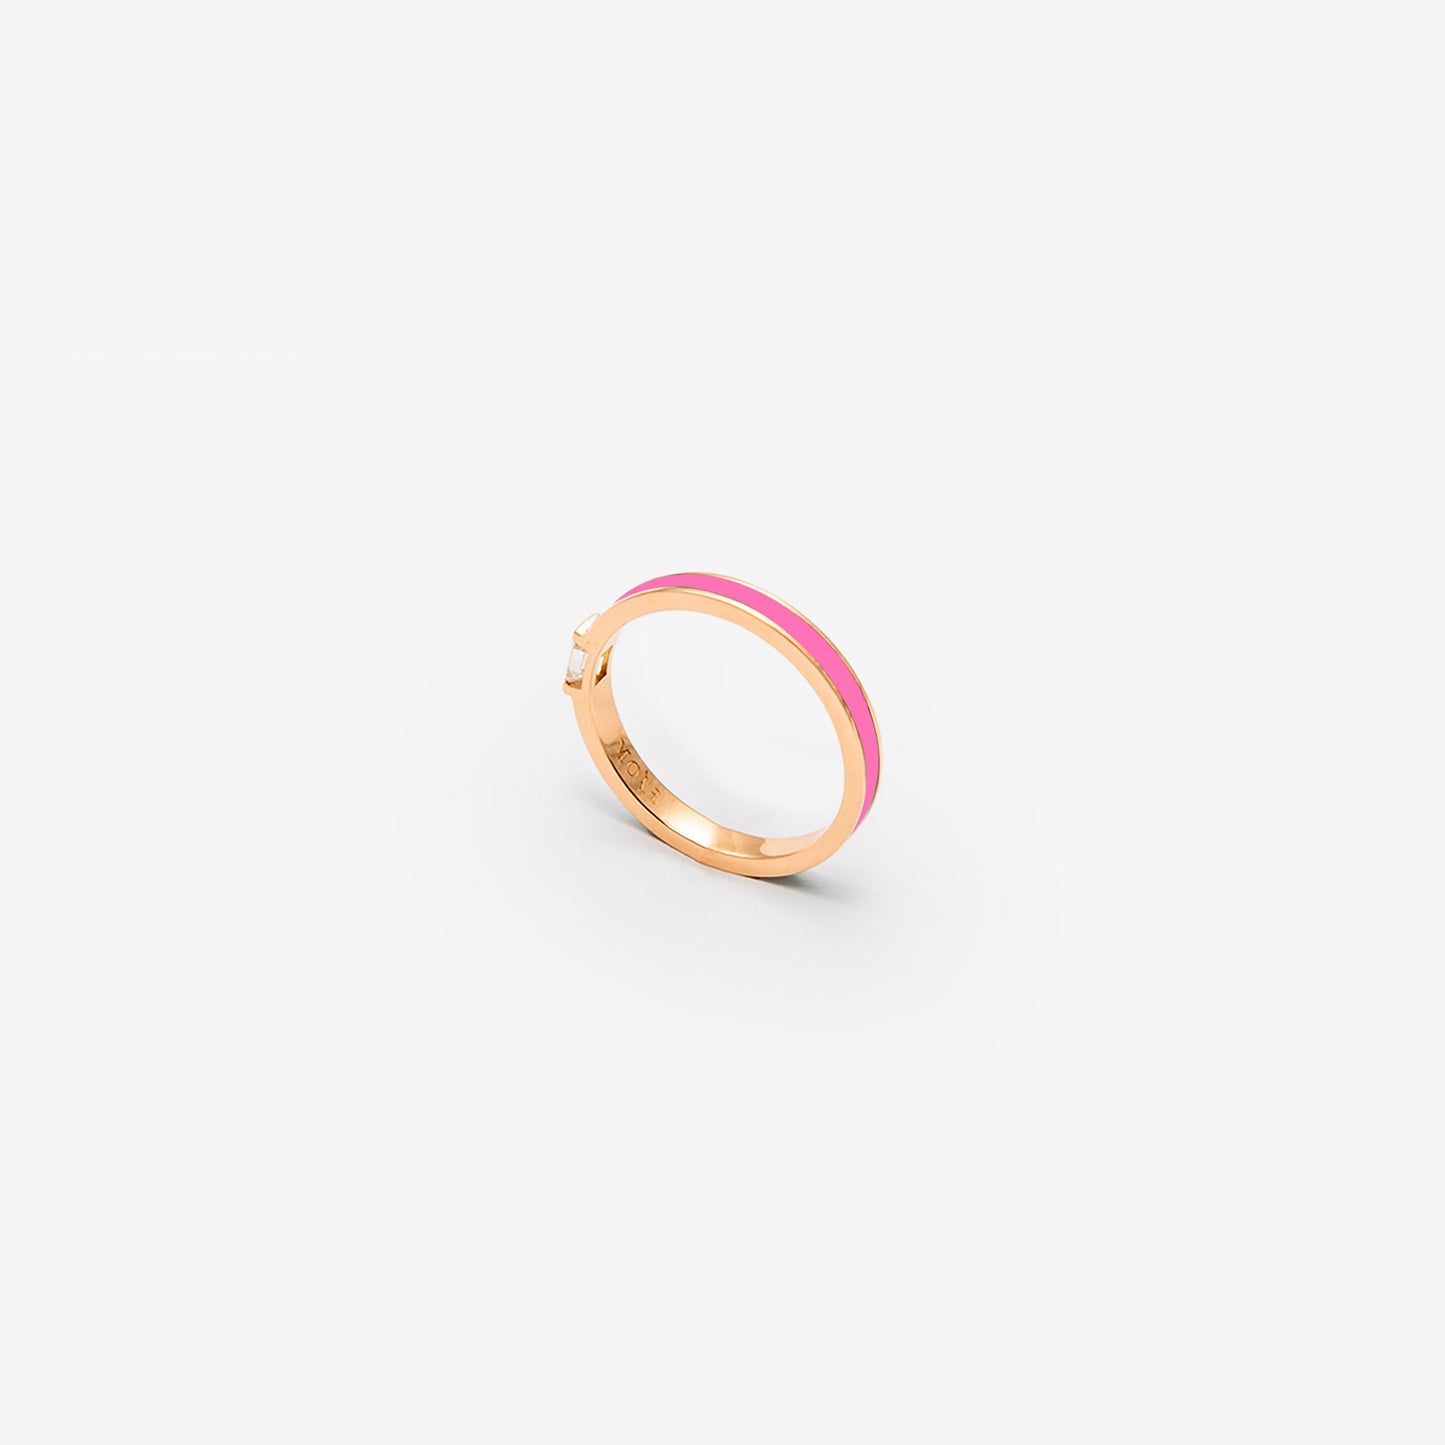 Rose gold band with fluo pink enamel and a diamond